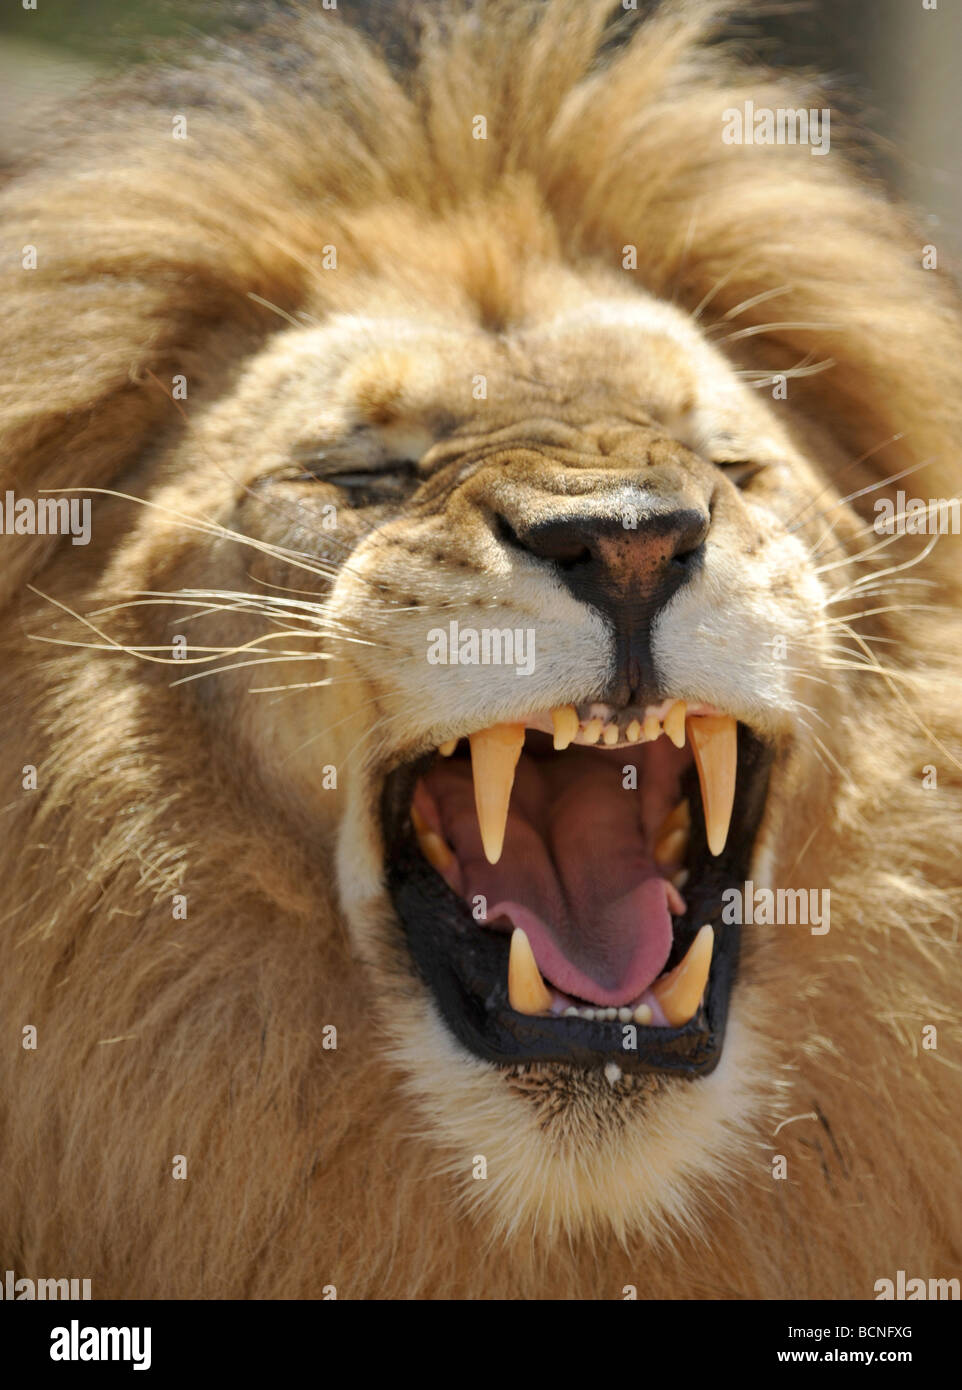 close up full frame of exotic male adult african lion snarling showing huge teeth / fangs Stock Photo